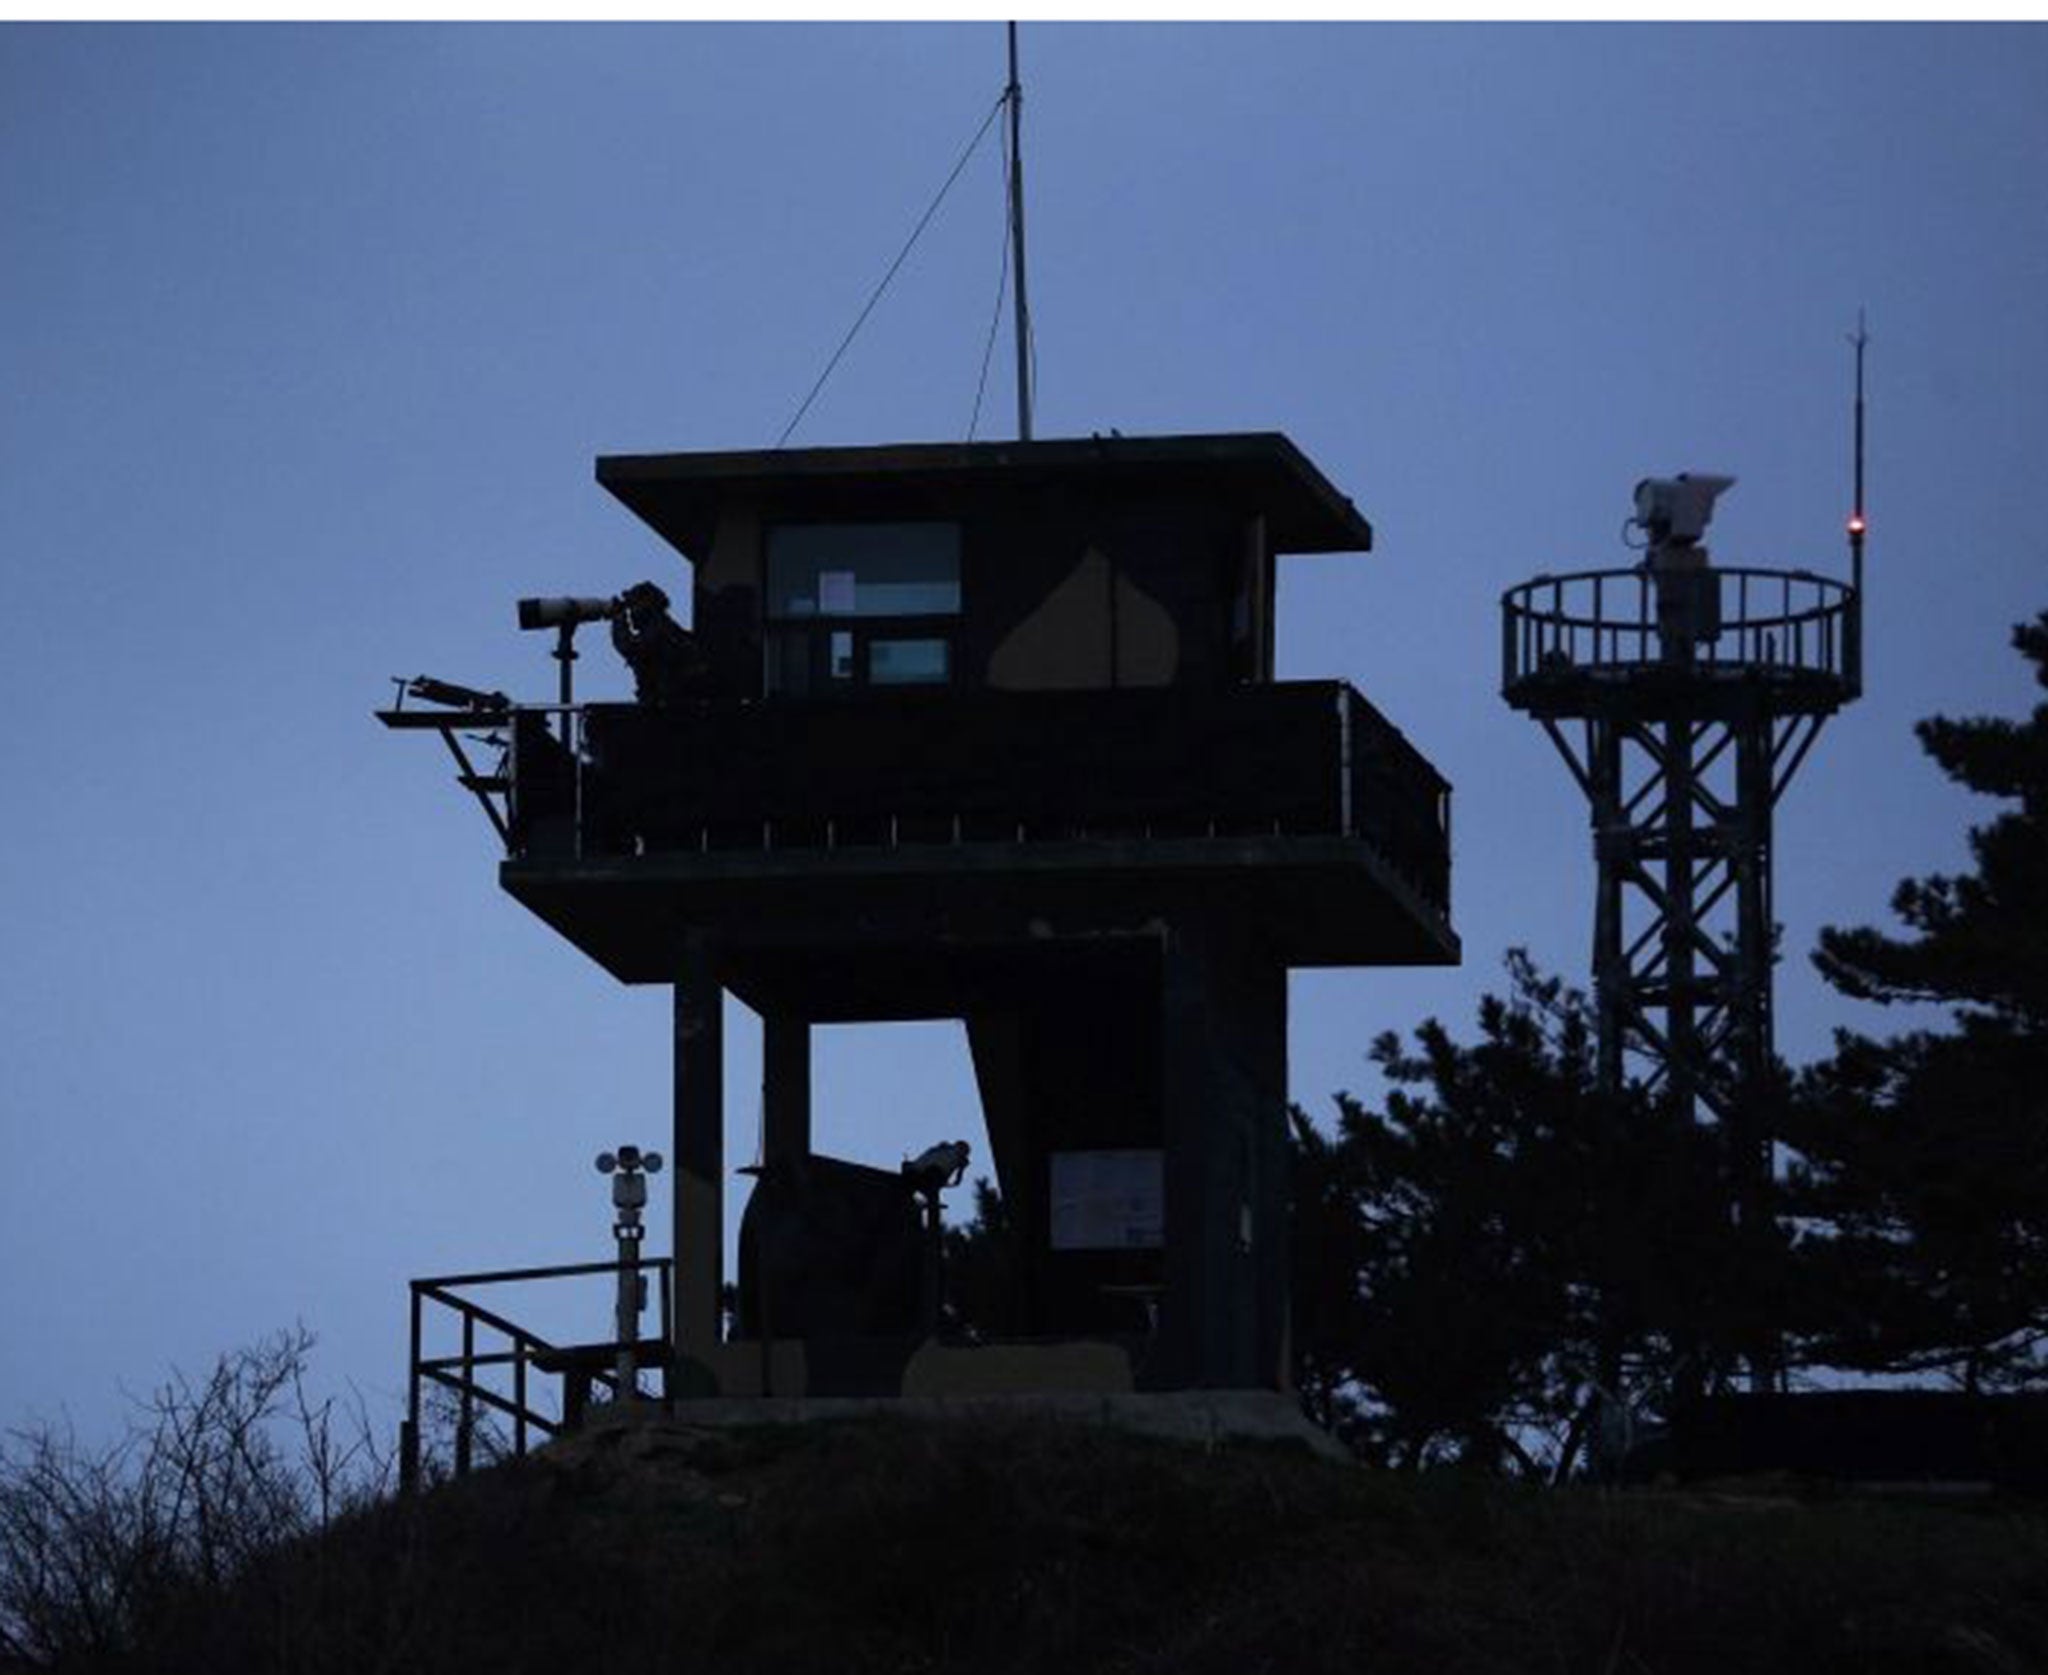 A South Korean soldier (unlinked to the shooting) uses binoculars to look out to sea from a watchtower on the Yeonpyeong island, which lies just inside the South Korean side of the Northern Limit Line (NLL) in the Yellow Sea